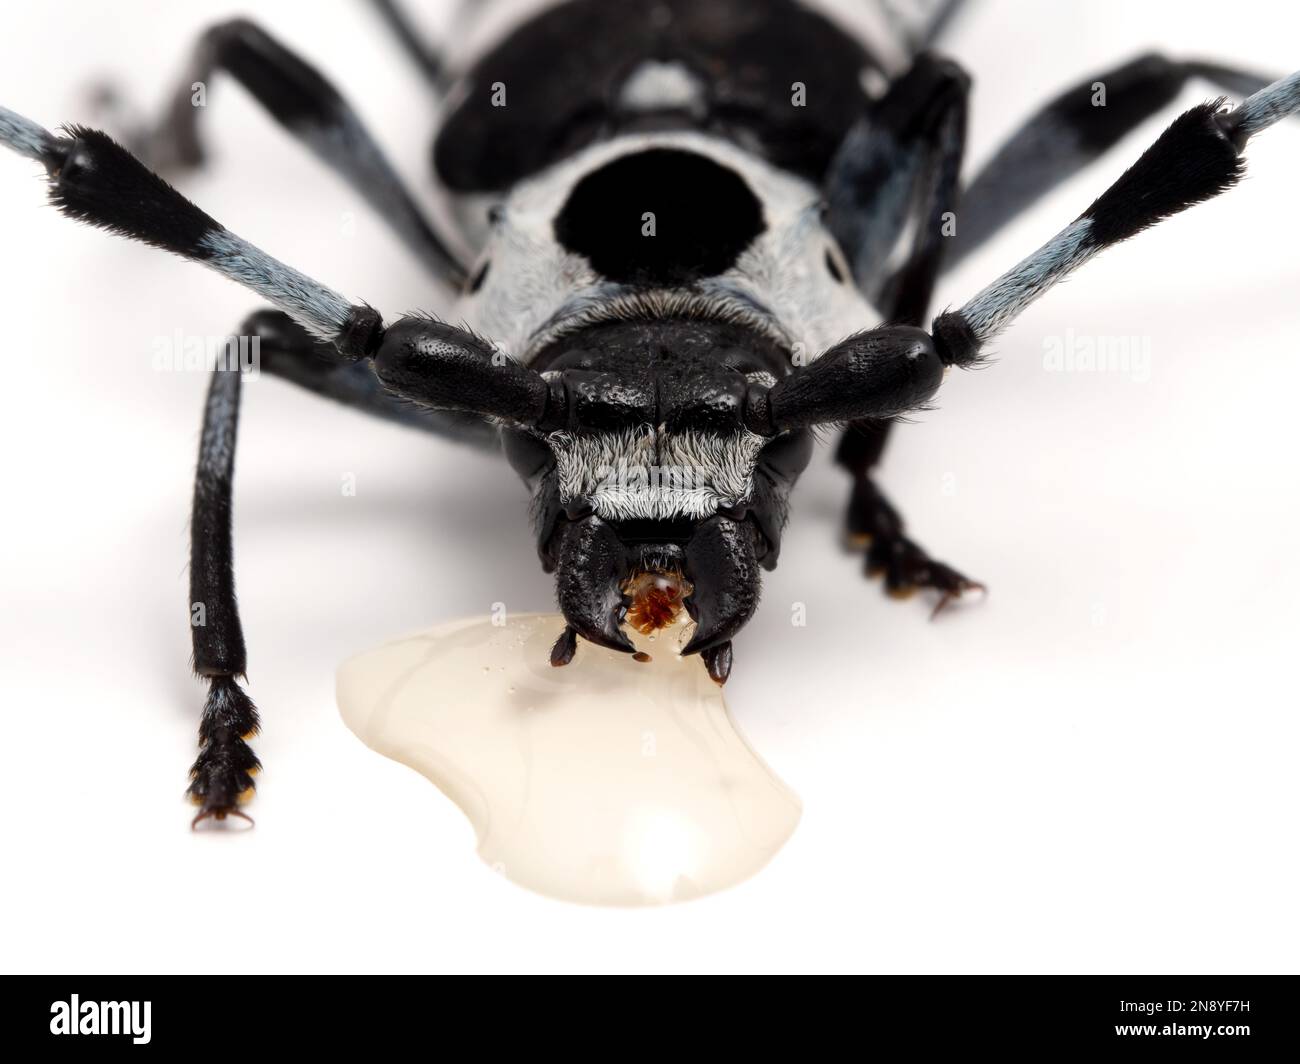 close-up of a male banded alder borer beetle (Rosalia funebris) drinking from a drop of honey, isolated Stock Photo